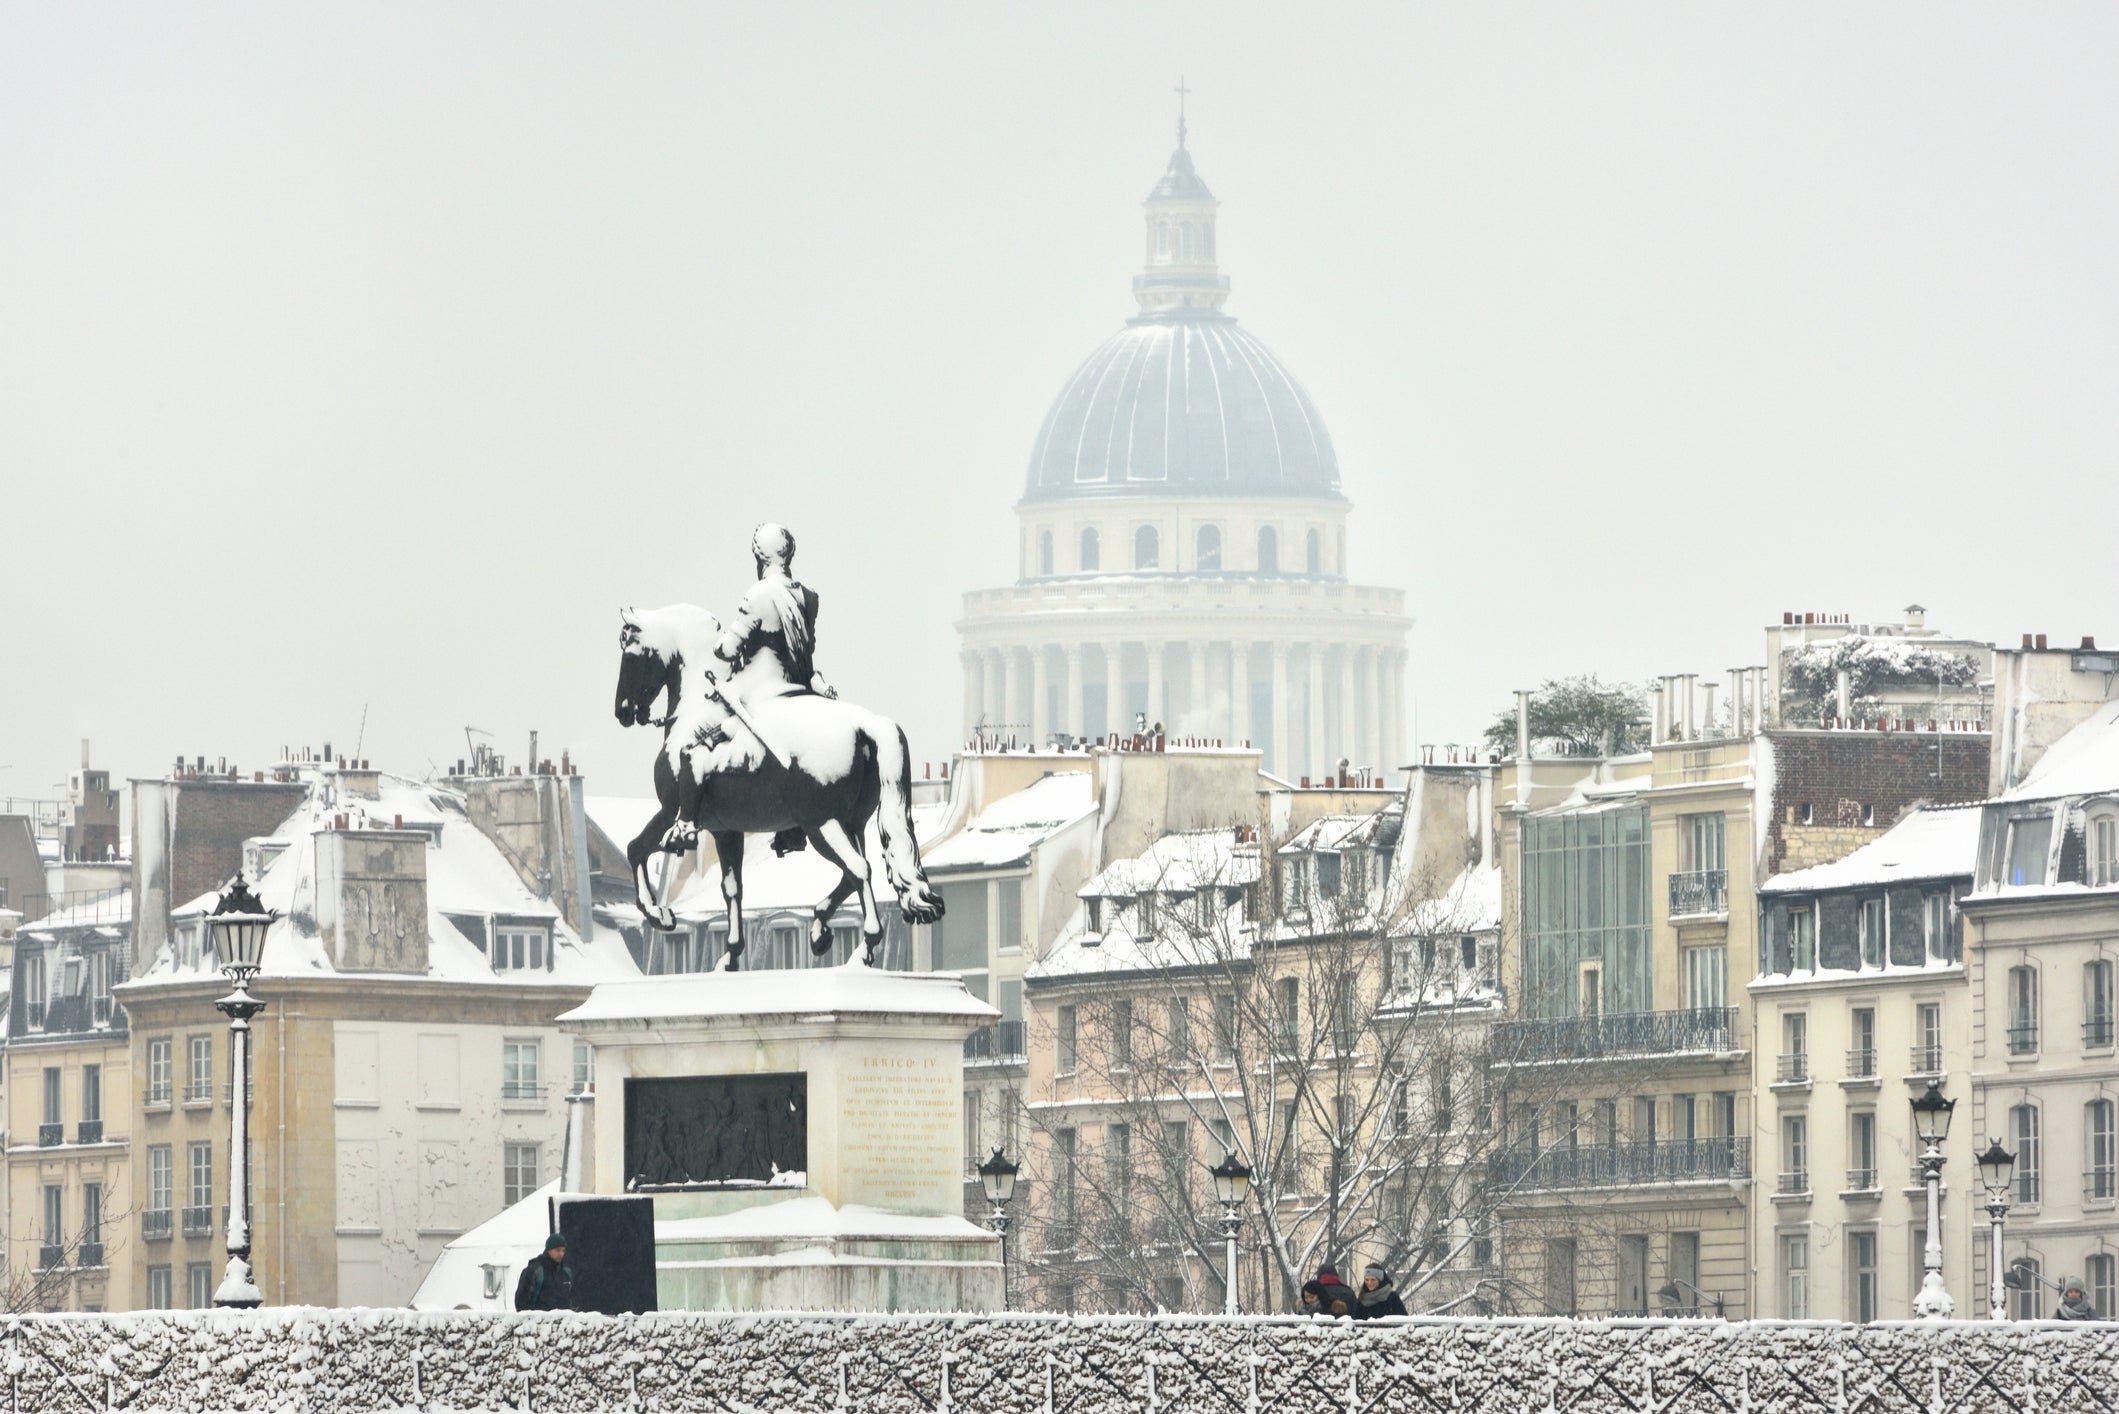 France, Paris, Pont Neuf, Equestrian statue of Henri IV and Pantheon dome in winter